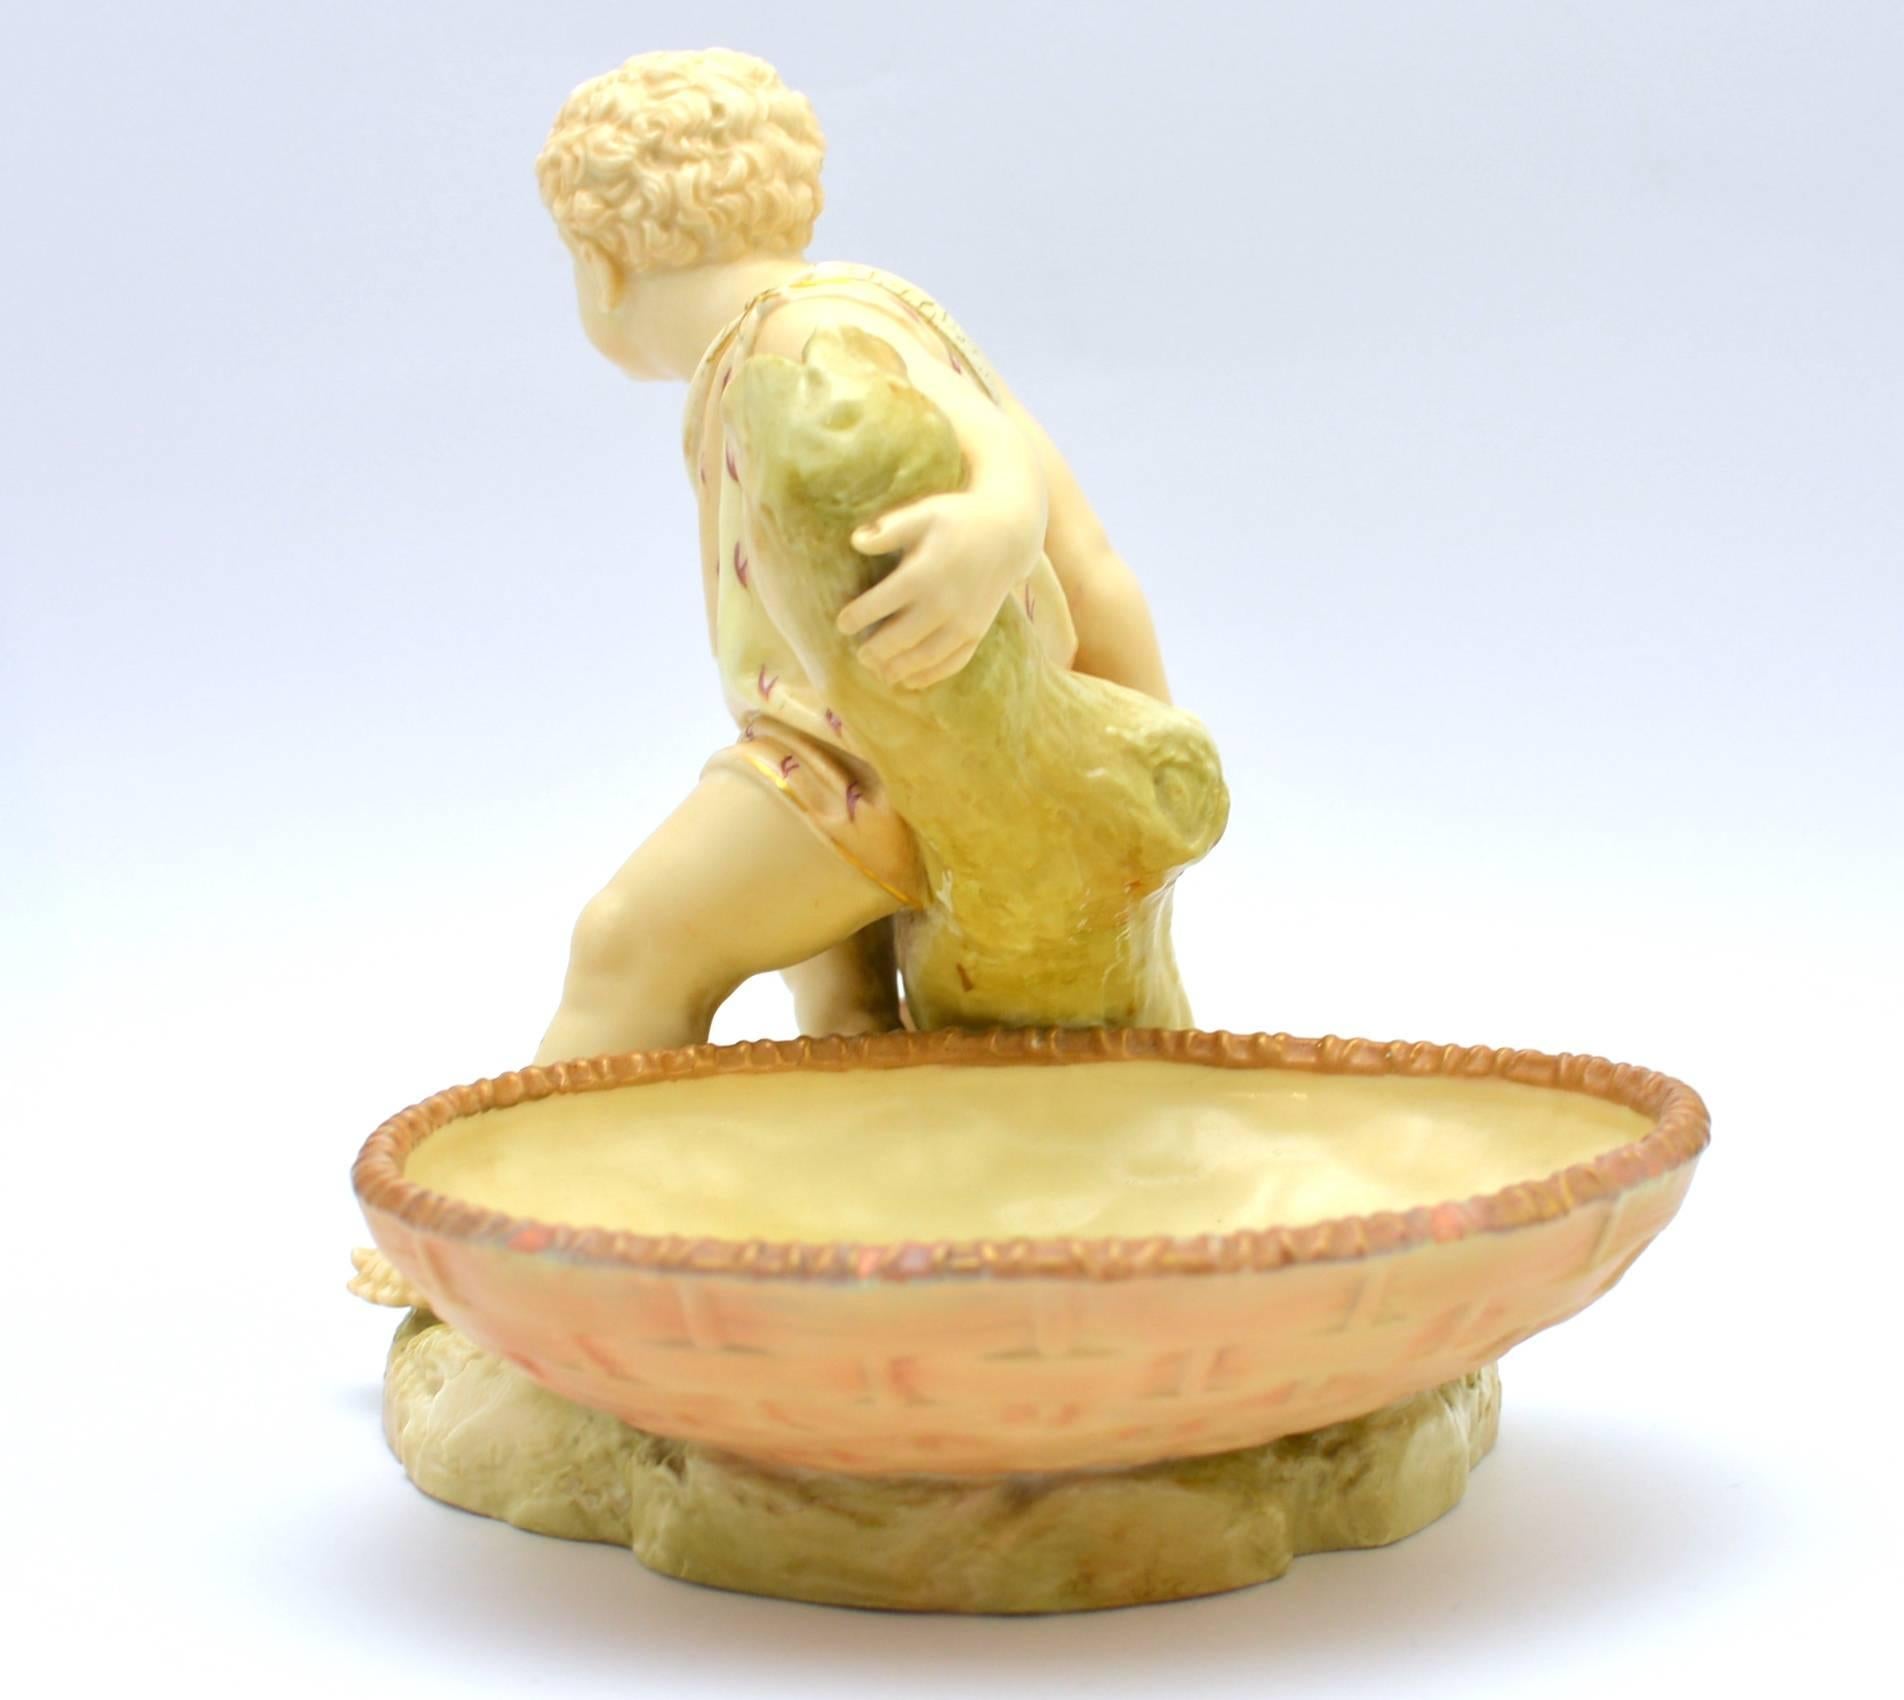 Representative of the continent of Australia, modelled by James Hadley, 1887, depicting a young Aboriginal boy with club, seated on a tree trunk, reminiscent of the young Hercules, a large oval basket beside him, impressed 'Hadley' to the back of